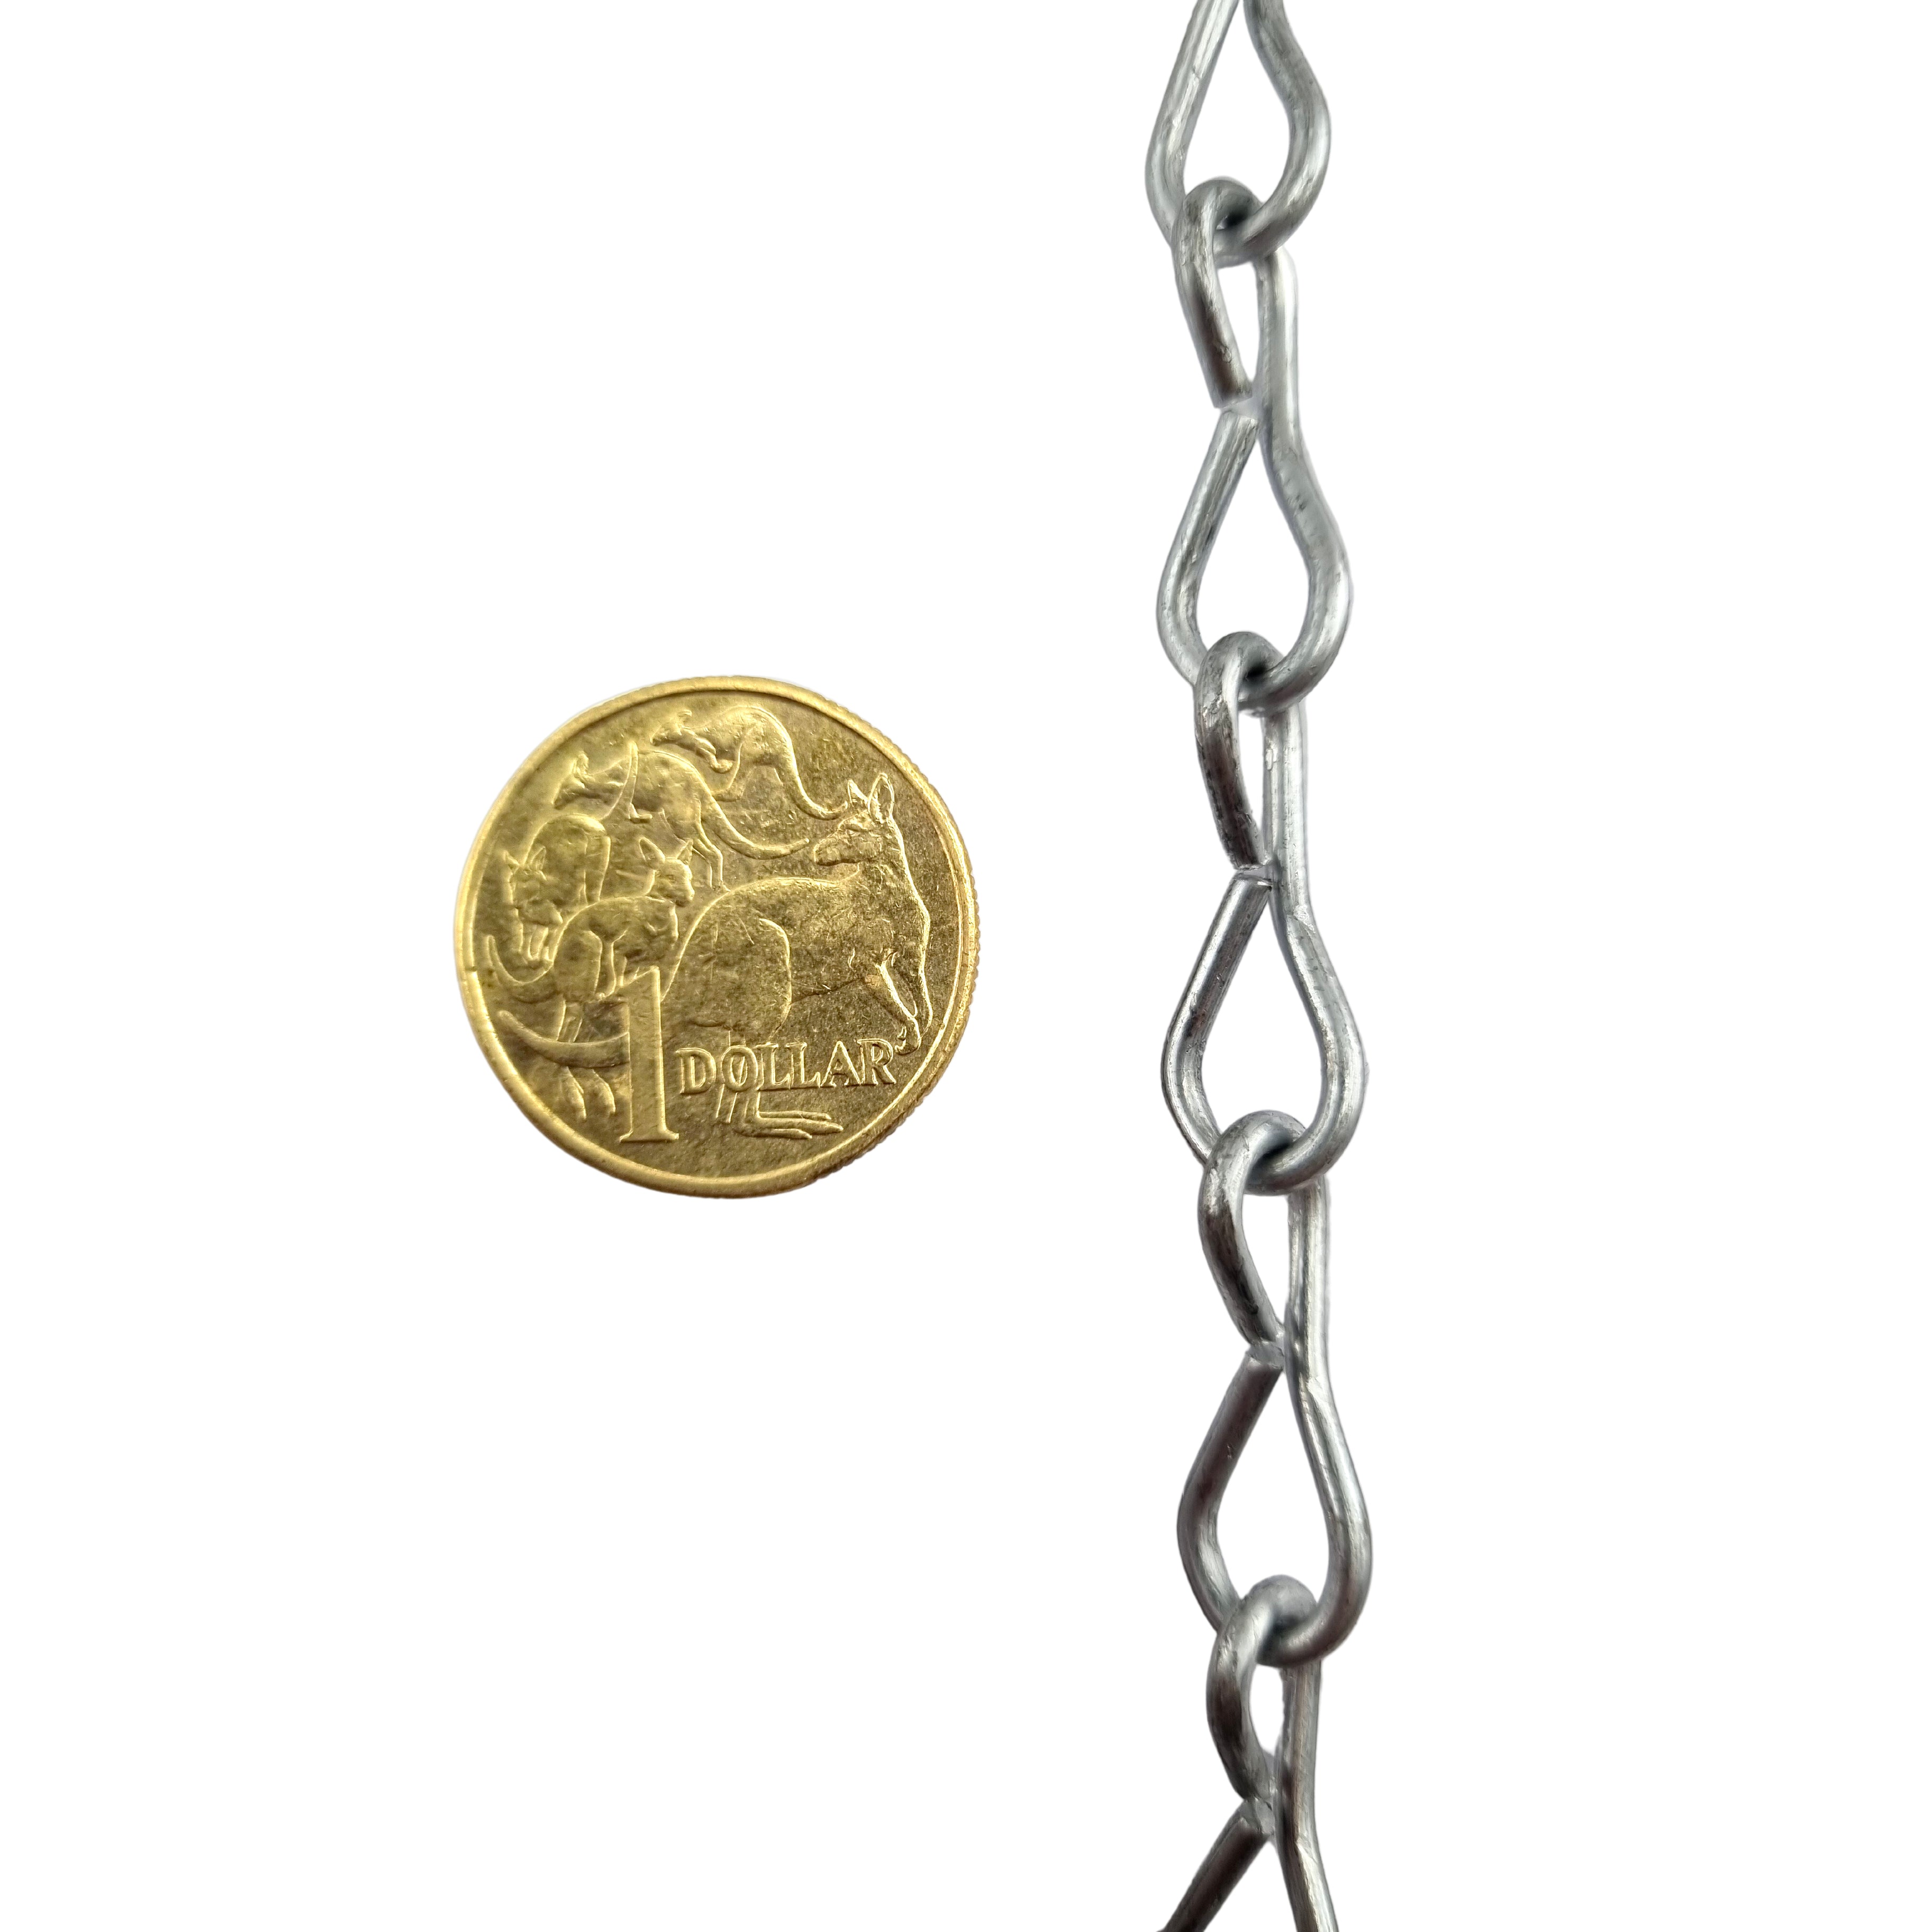 Australian made Single Jack Chain in galvanised finish, size 2mm. Chain by the metre. Melbourne, Australia.